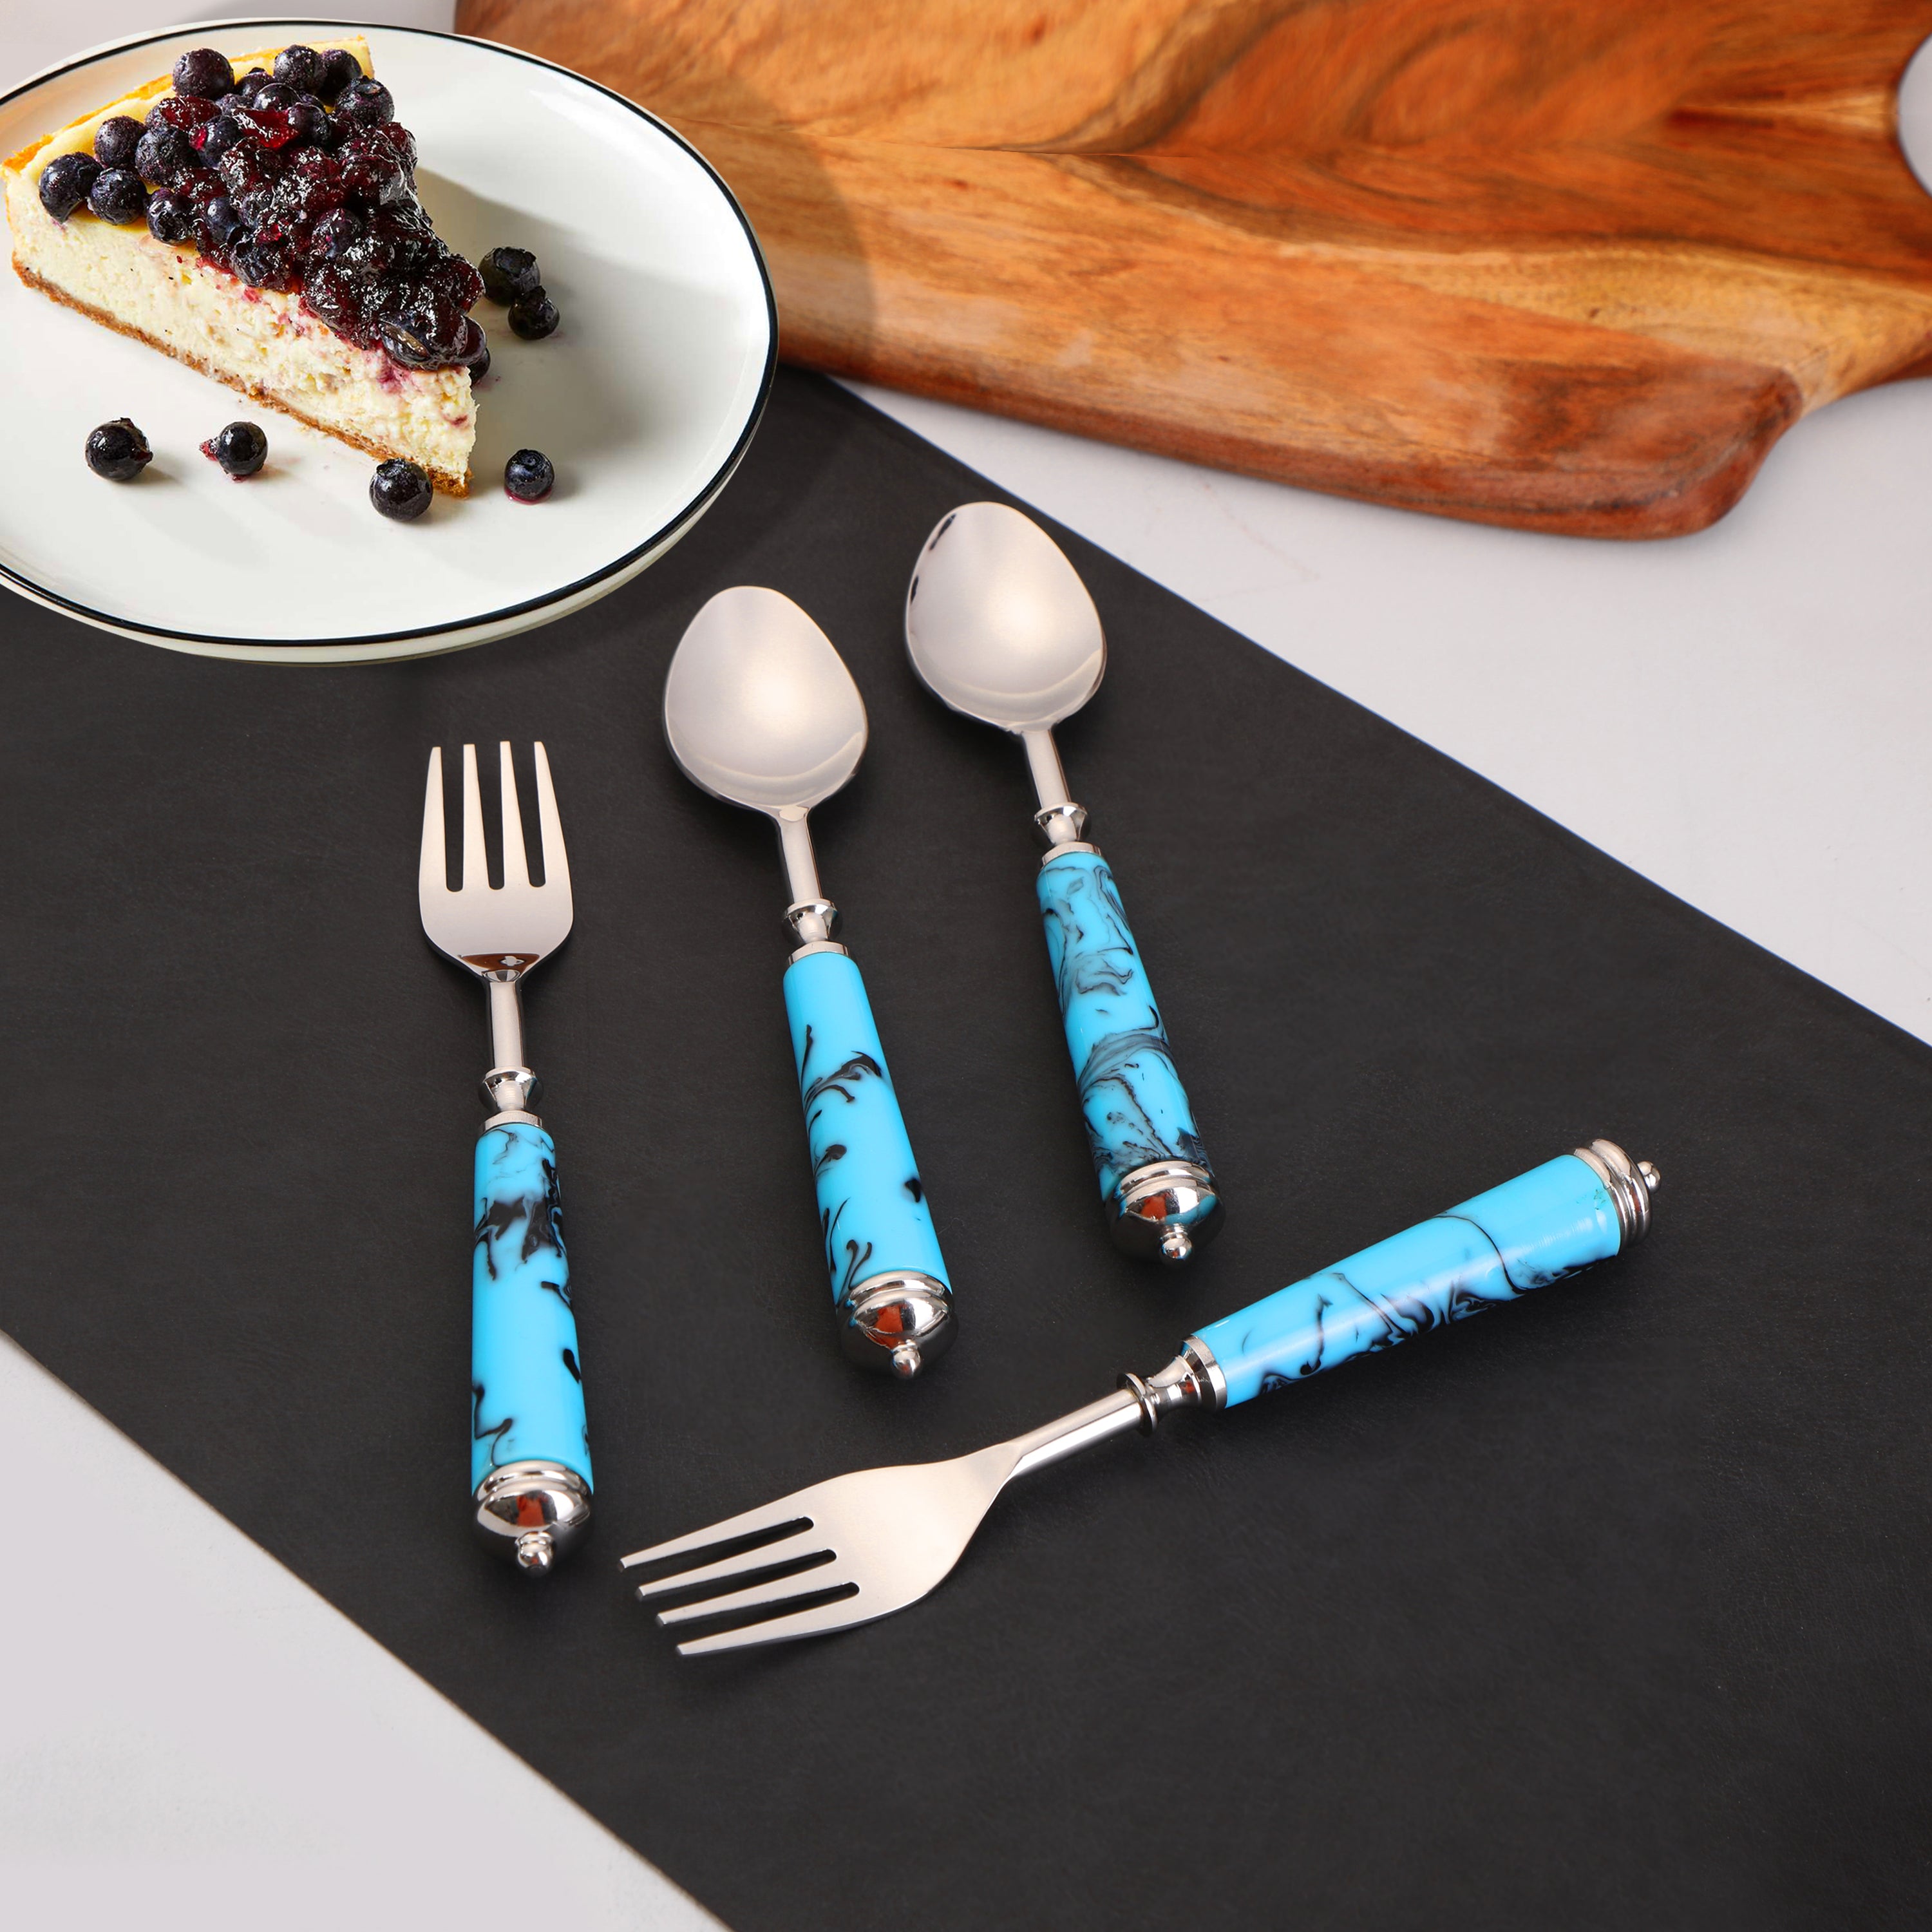 Cutlery and Serving Set - Dinner Set of 12 pieces - Blue Resin - THE HOME CO.